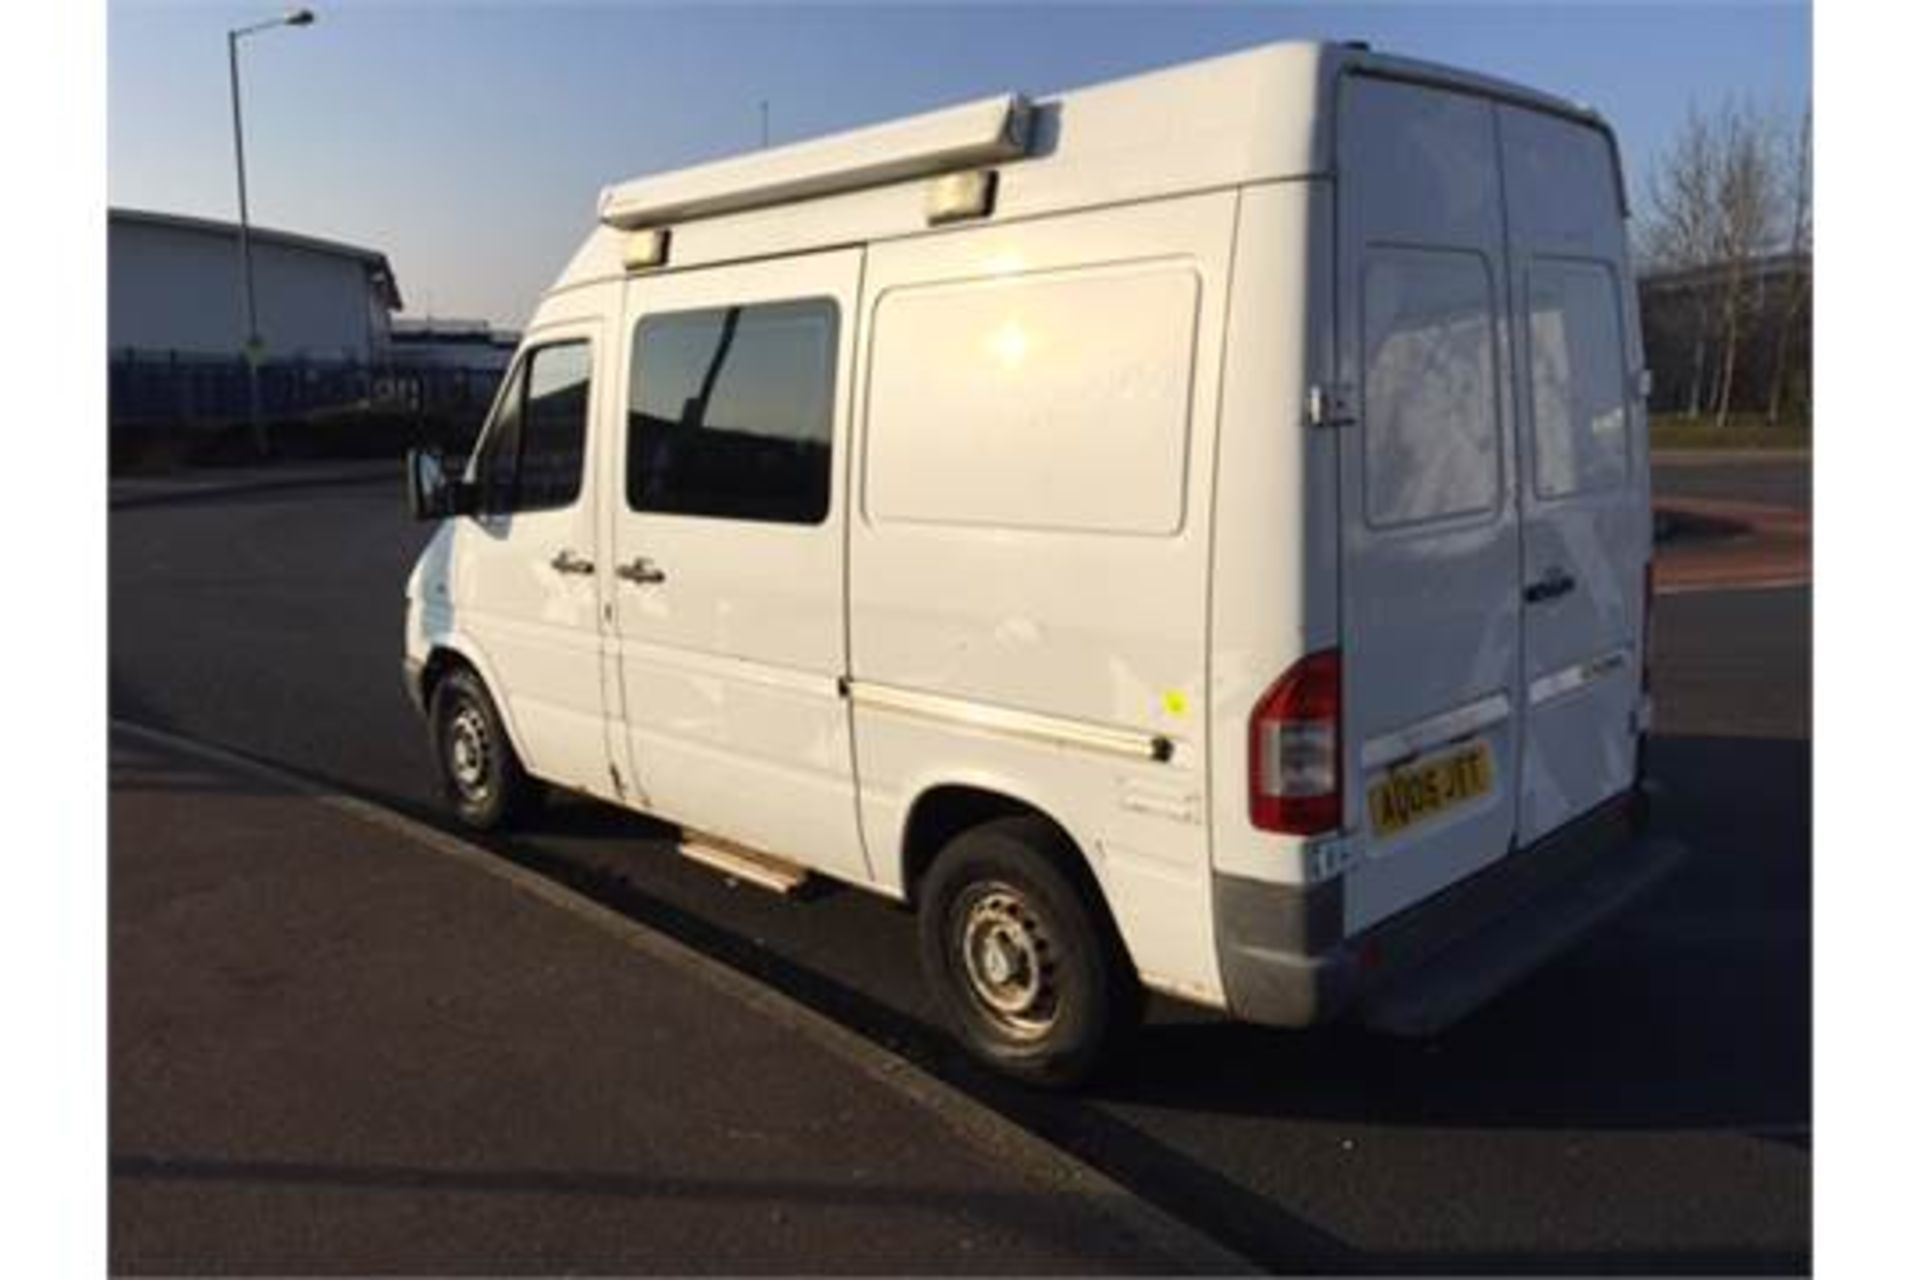 2005 Mercedes Sprinter 311 cdi 2148cc Diesel Van with side windows Owned and used by the police from - Image 3 of 23